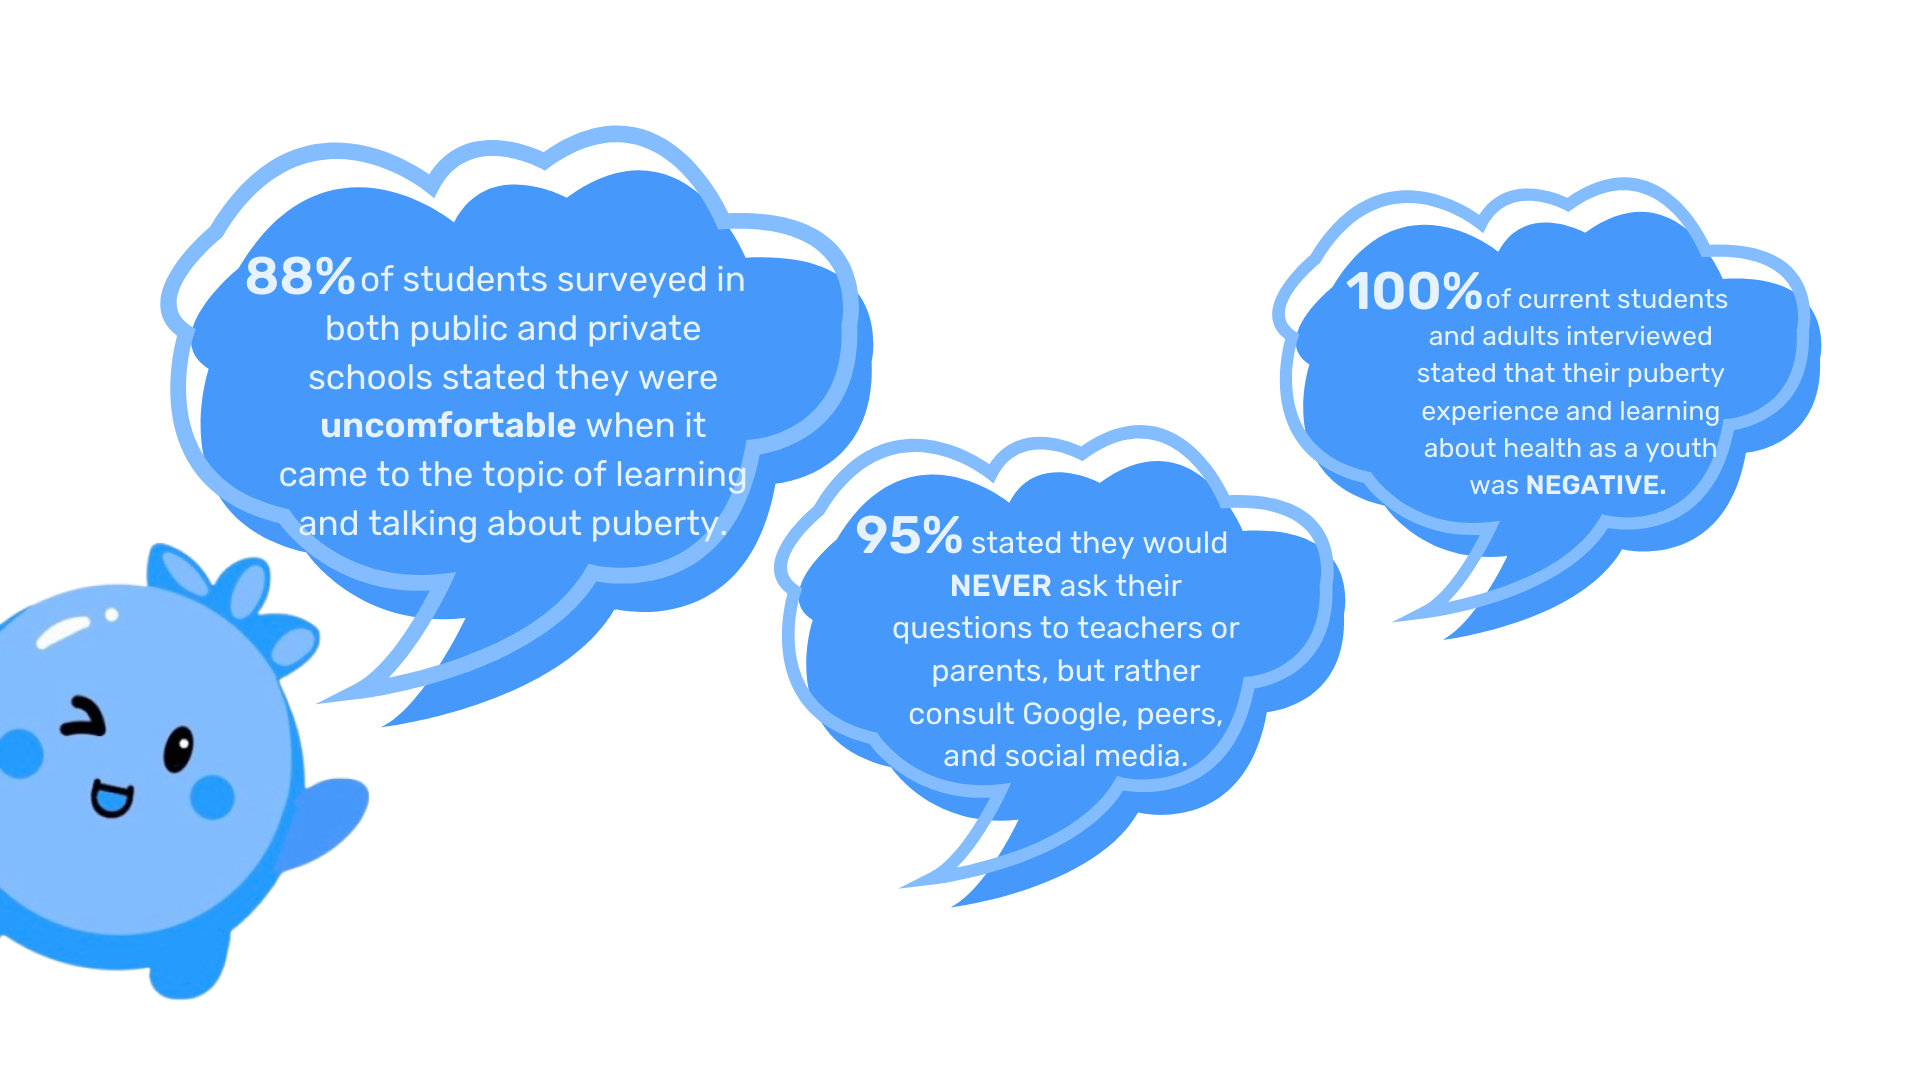 PUBERTY FACTS FROM SURVEYED STUDENTS, PARENTS, TEACHERS